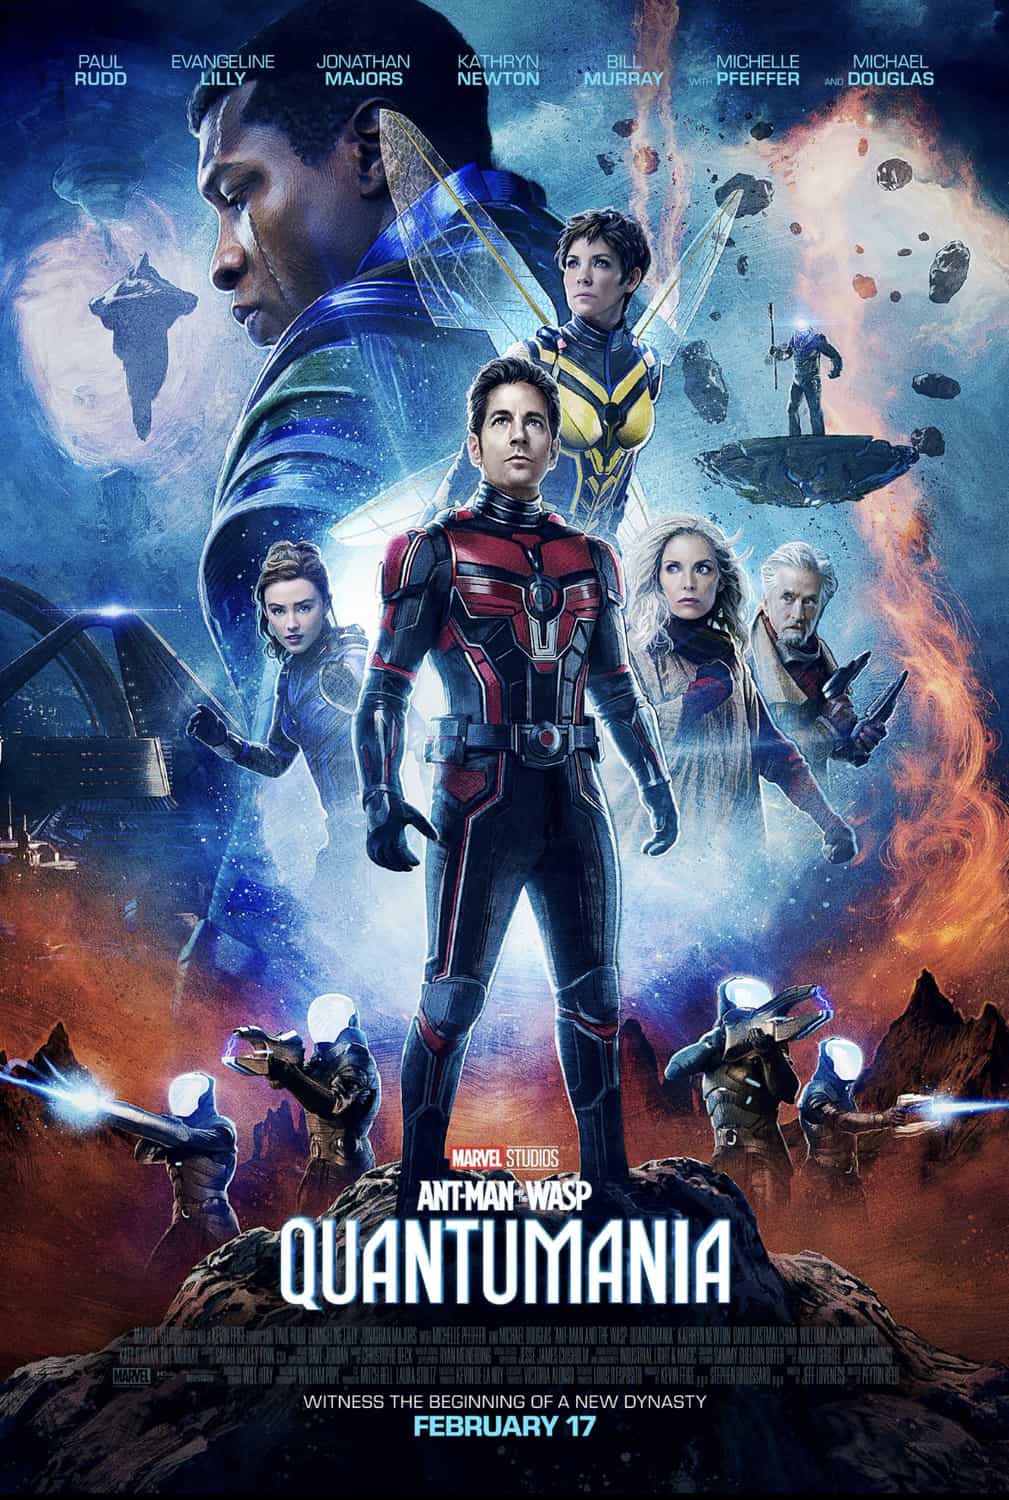 New poster released for Ant-Man and the Wasp: Quantumania starring Evangeline Lilly - movie UK release date 17th February 2023 #antmanandthewaspquantumania